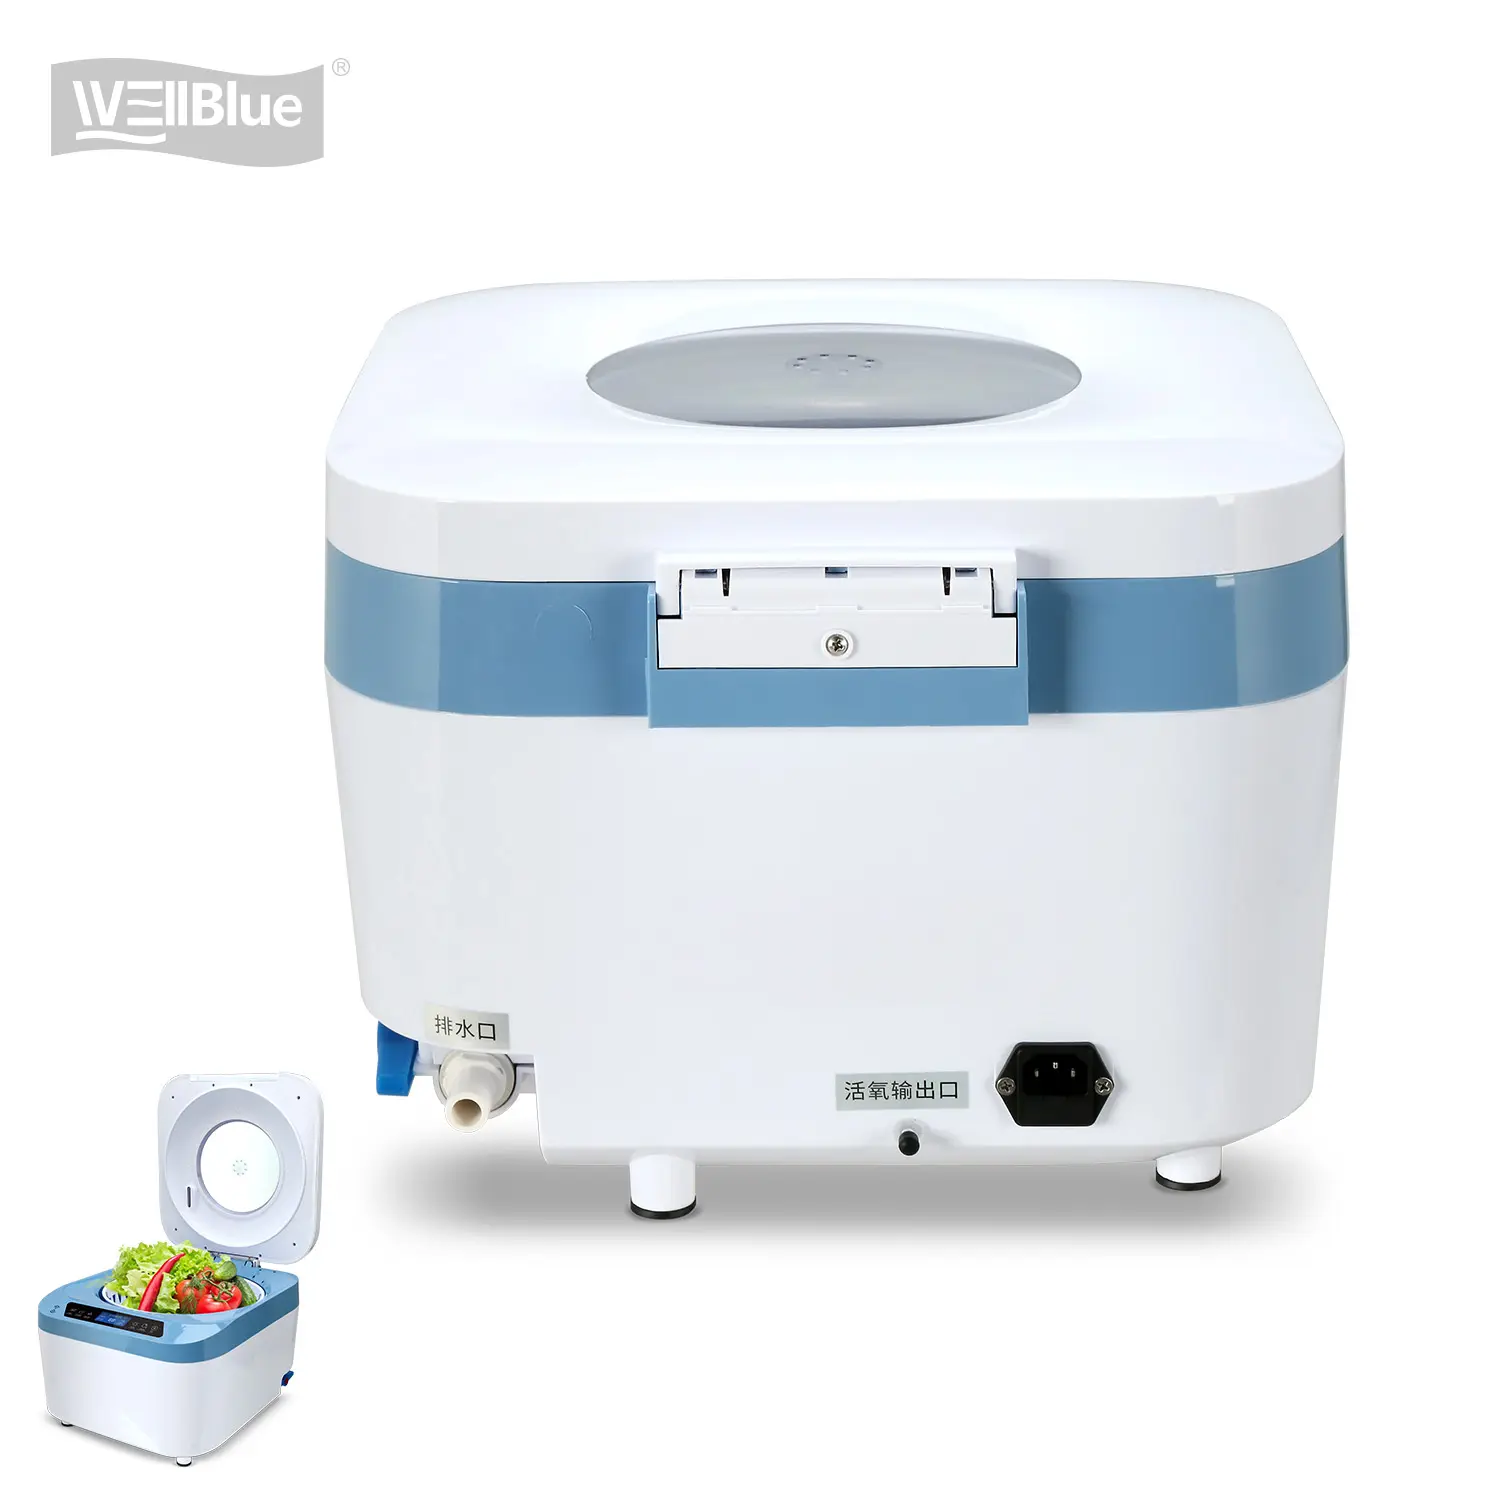 UV and Ozone Fruit Vegetable Cleaner and Vegetable Washer Kitchen food cleaning machine